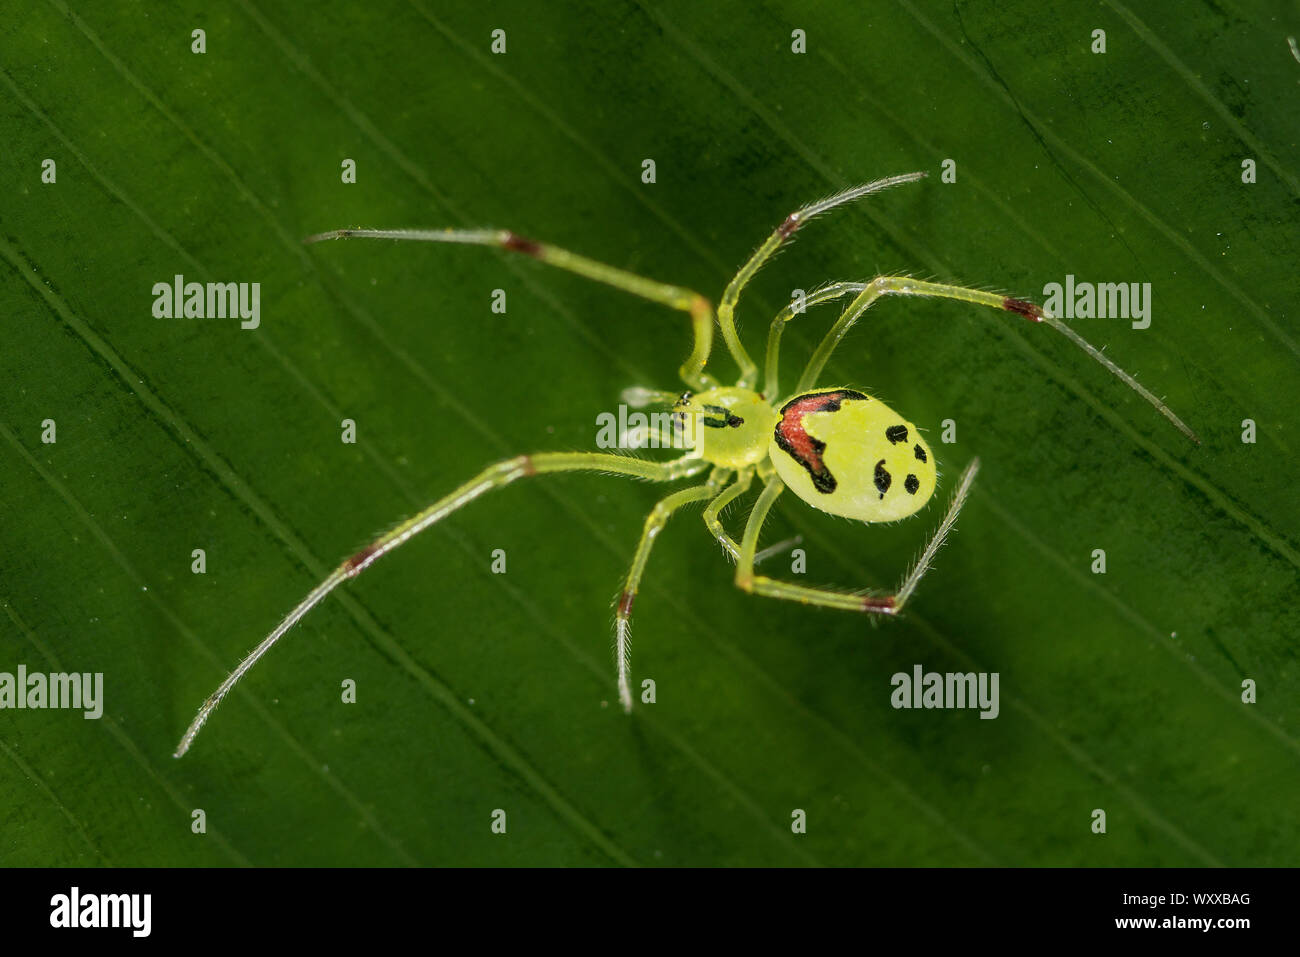 Hawaiian Happy Face Spider (Theridion grallator) is a spider in the family Theridiidae. Its Hawaiian name is nananana makaki?i (face-patterned spider) Stock Photo